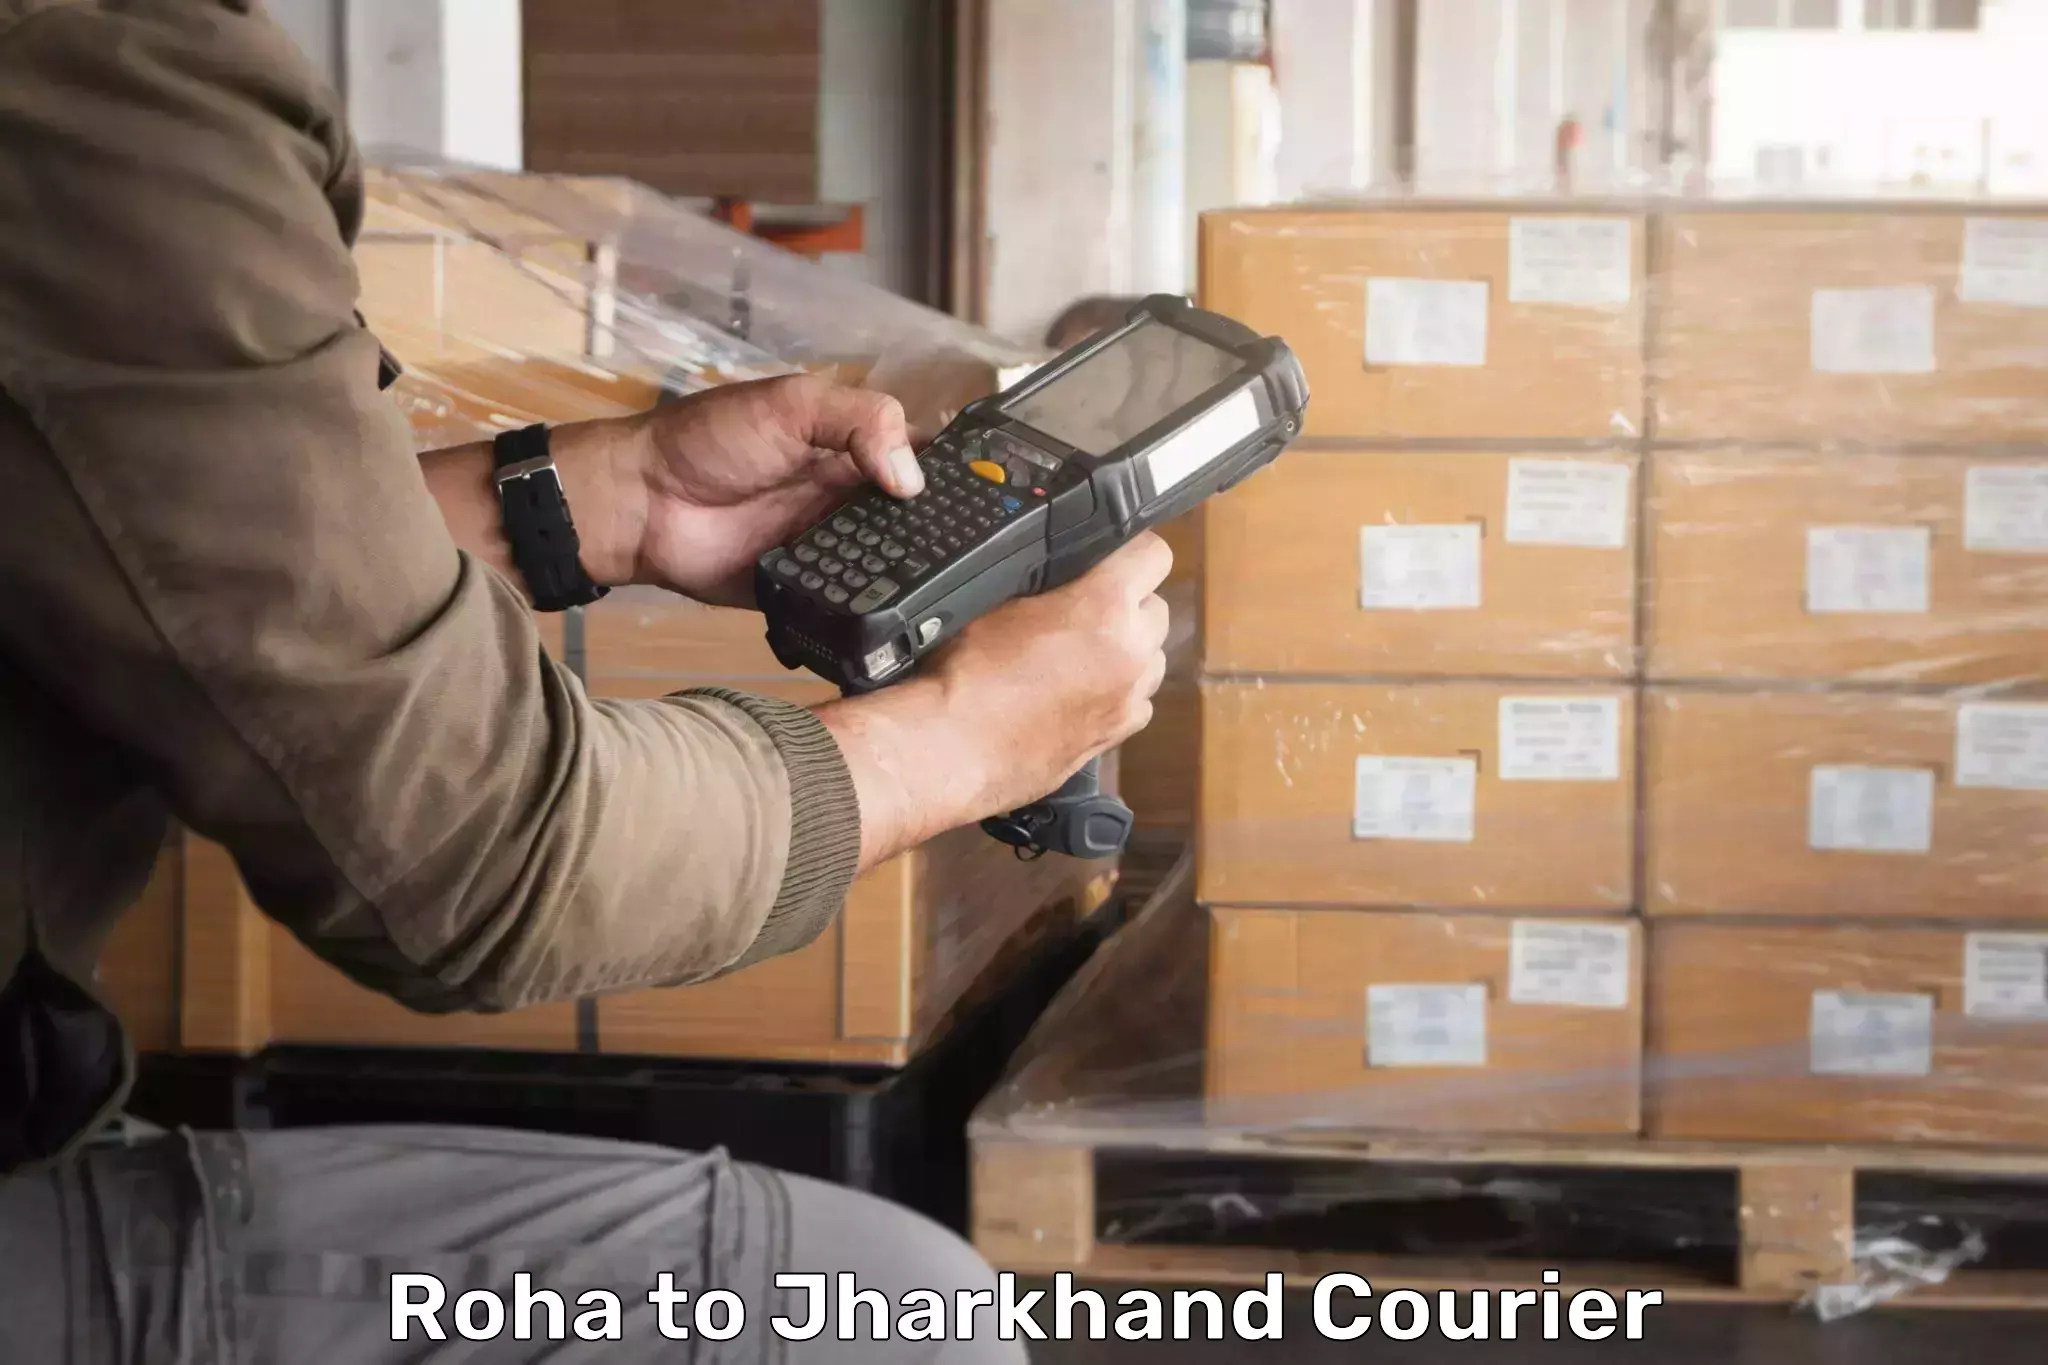 Efficient courier operations Roha to Palamu